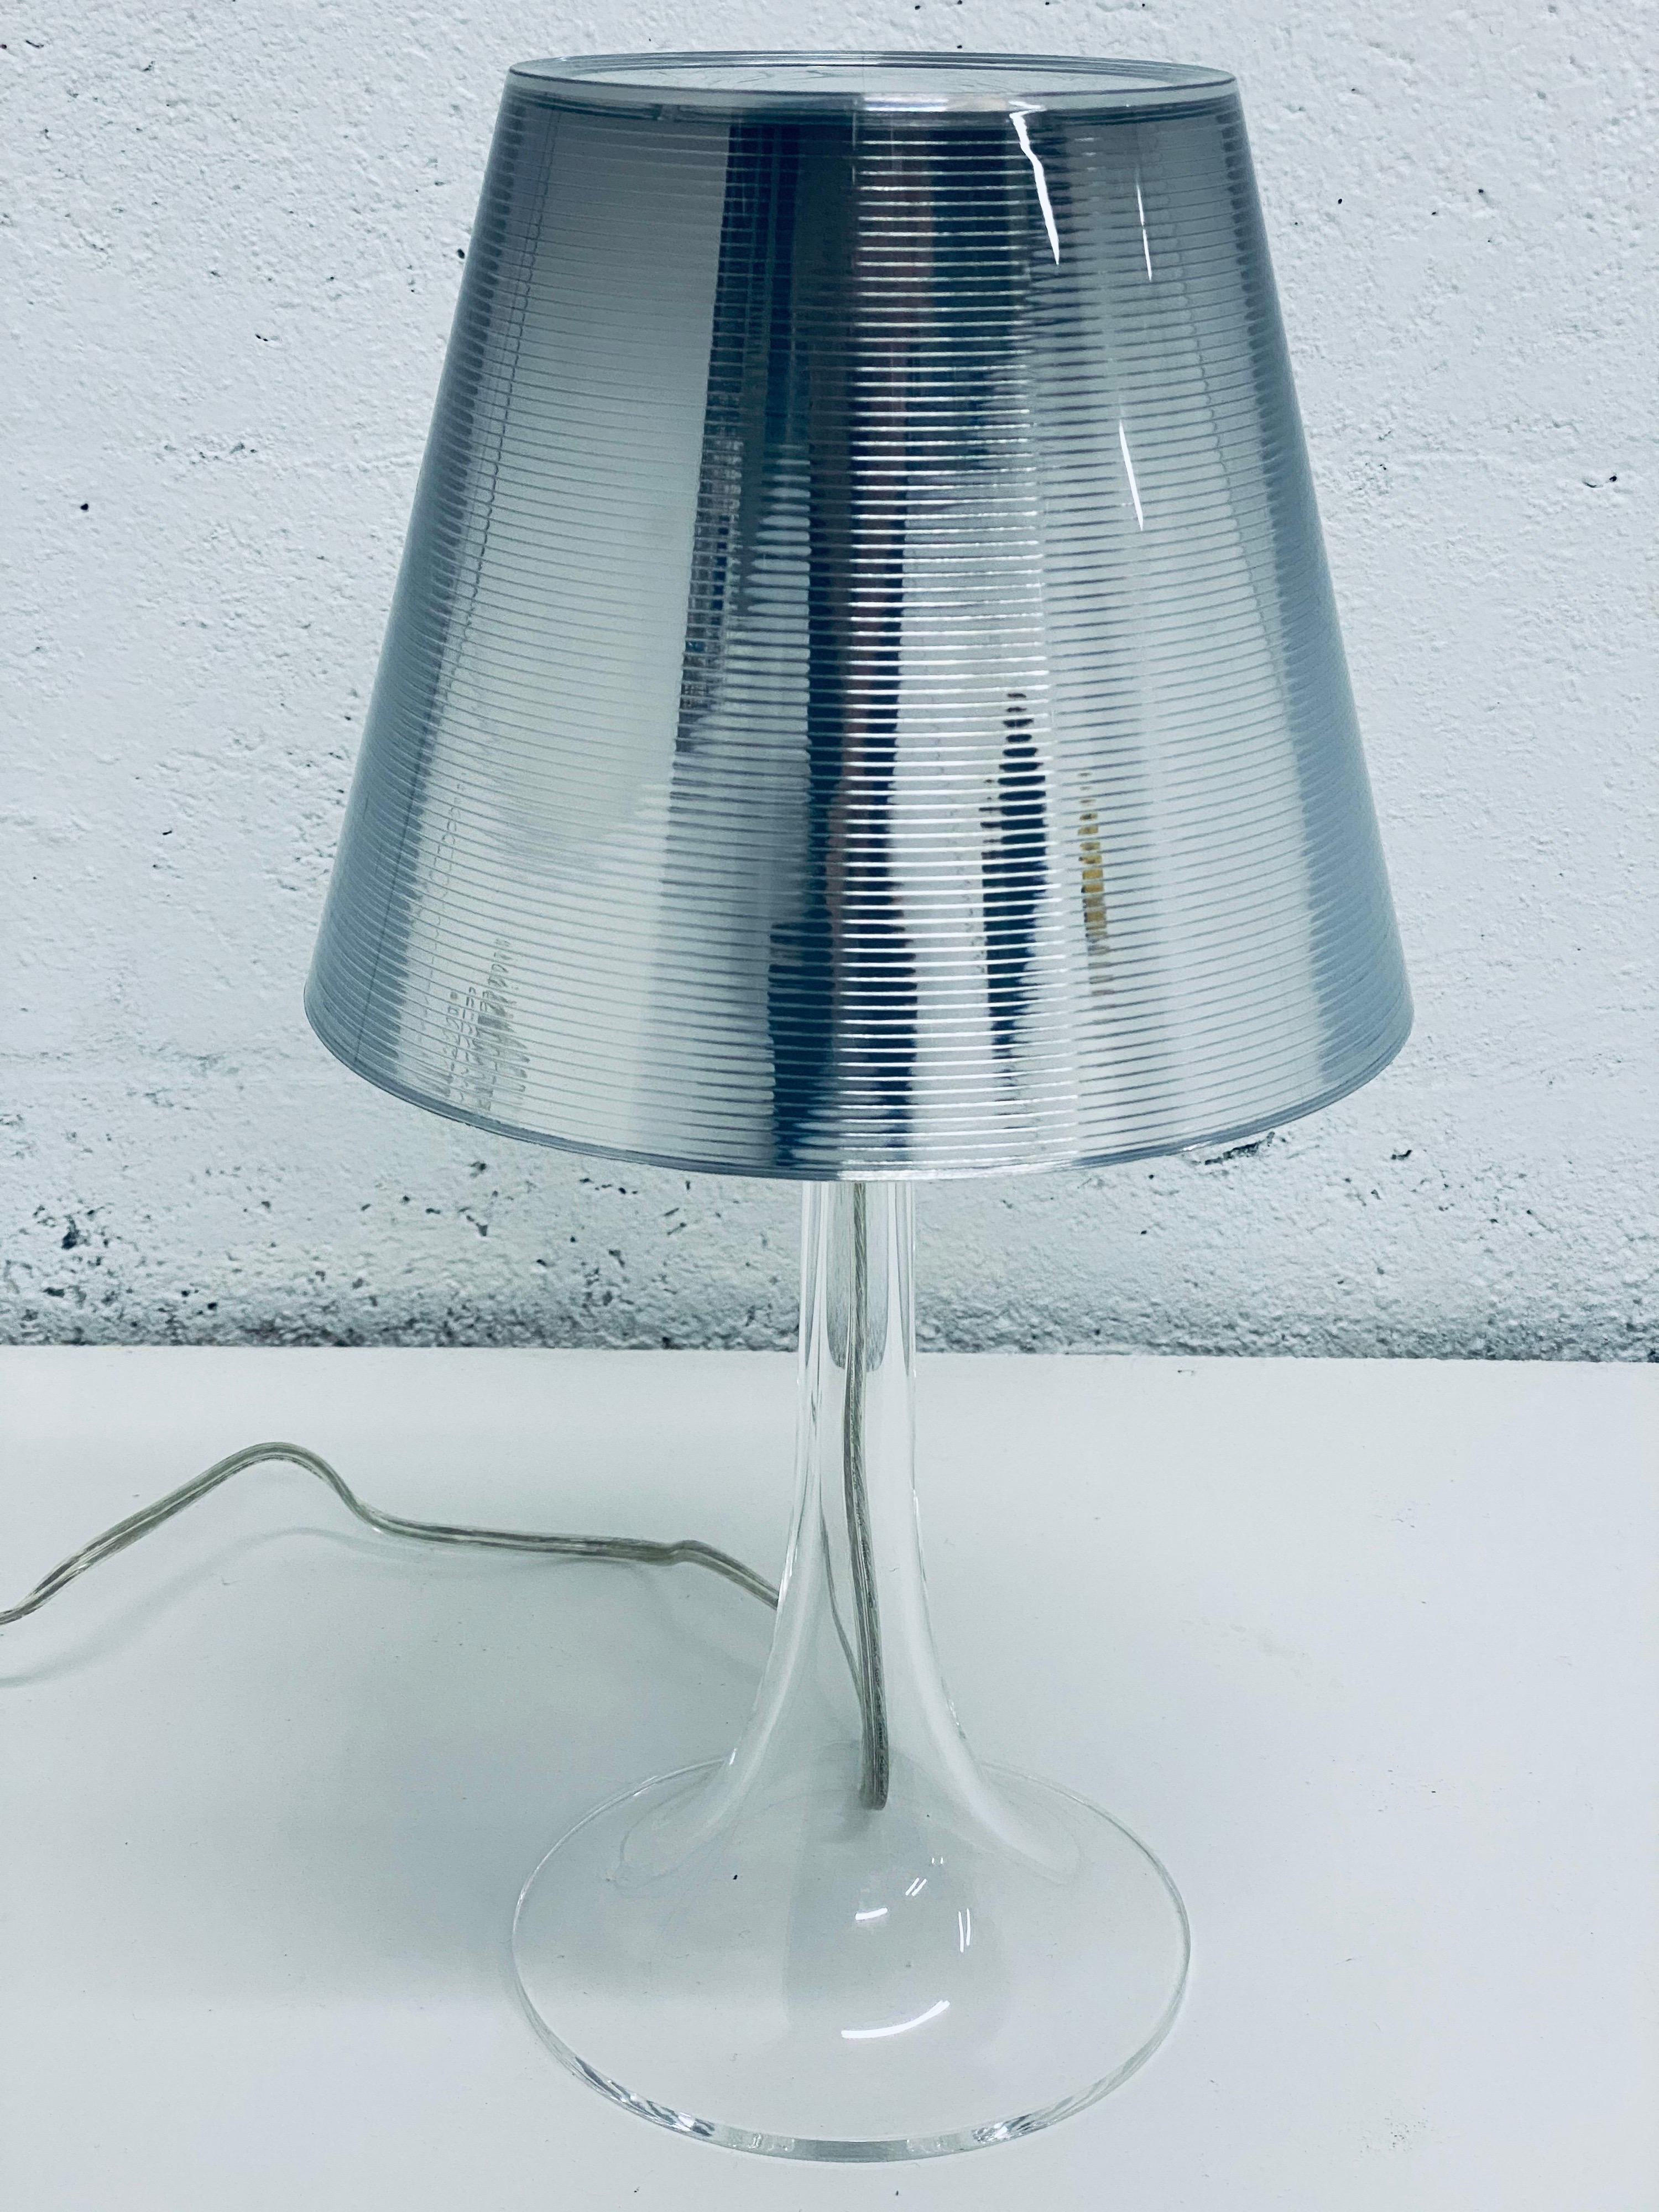 Miss K aluminized silver table or desk lamp designed by Philippe Starck for Flos.

Created by innovative design master Philippe Starck, the Miss K table lamp brings a delightful duality to its work. When unlit, its transparent PC (polycarbonate)